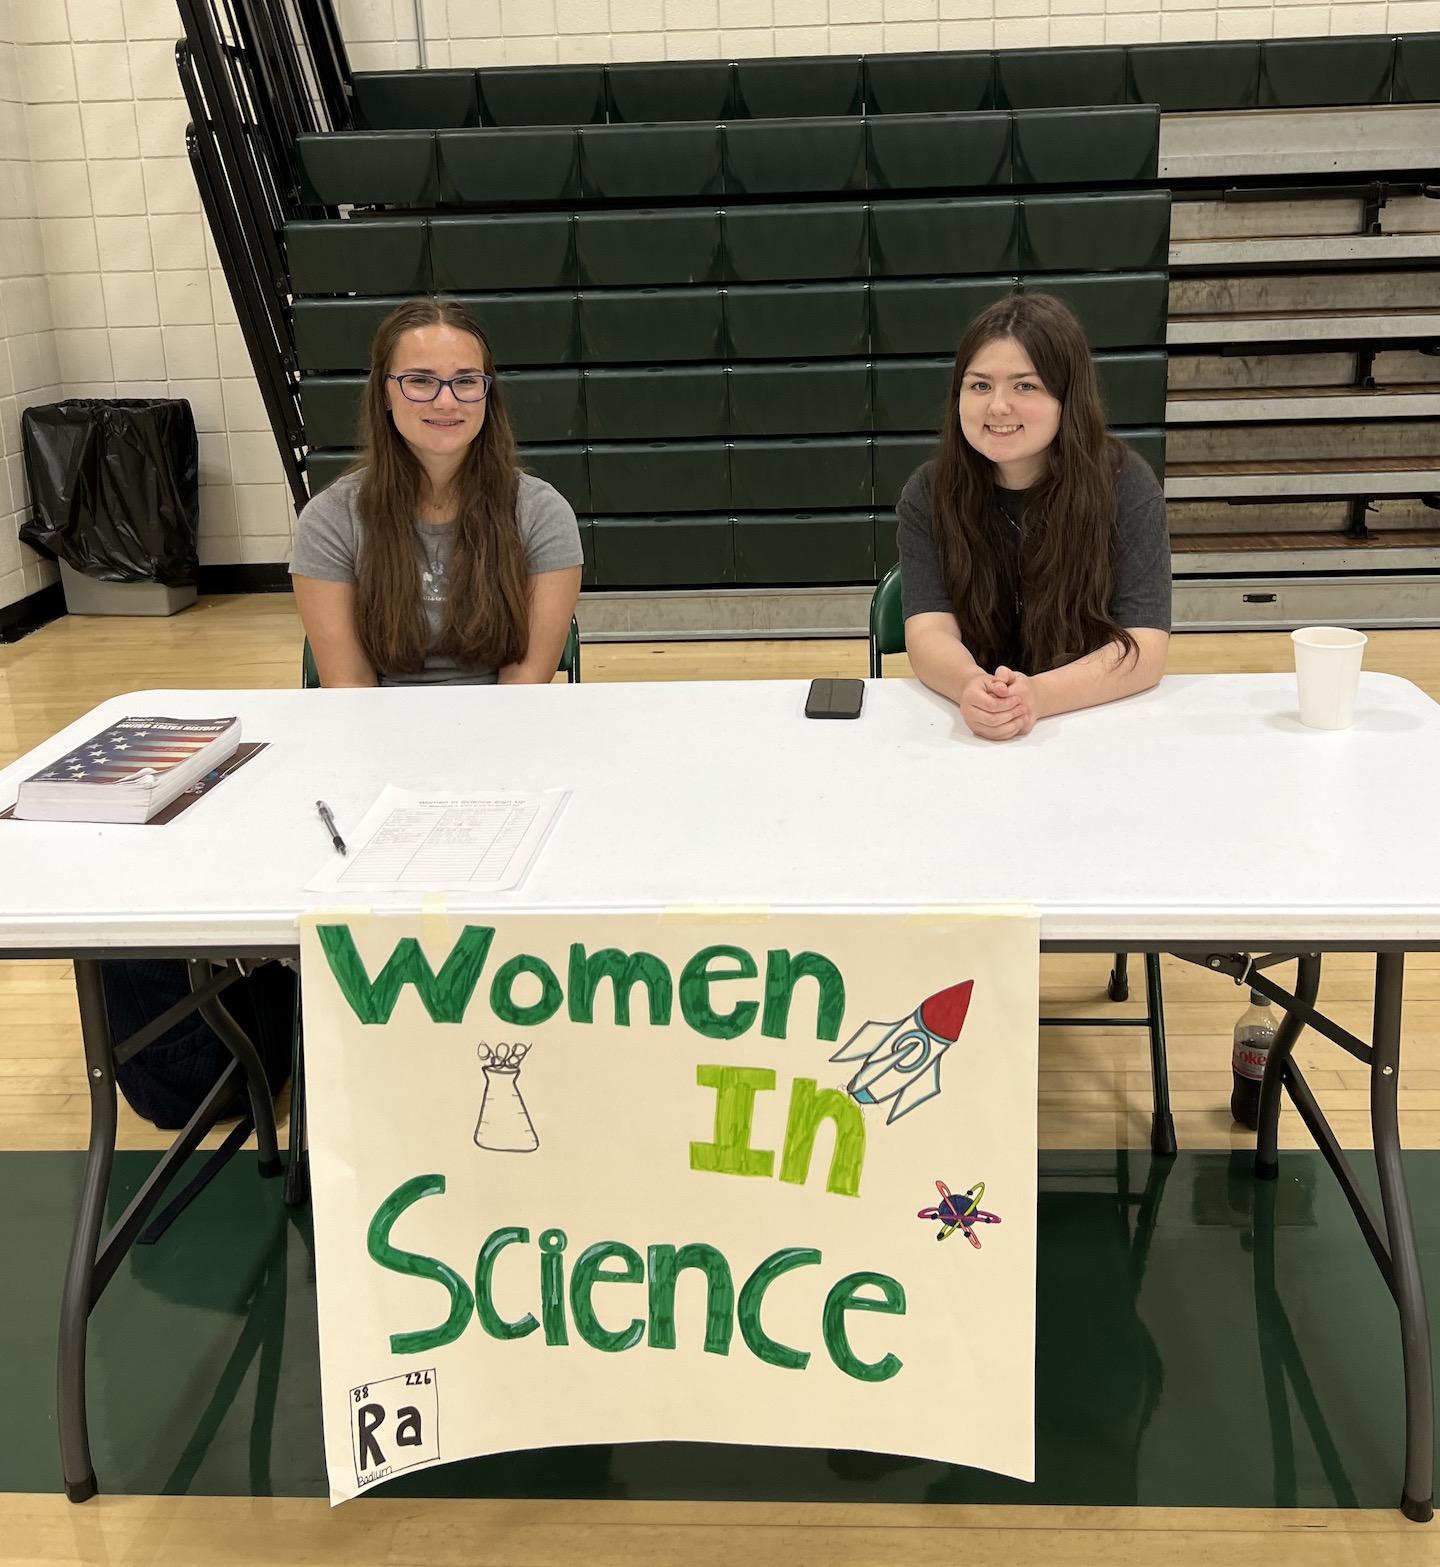 Emily Valenta and Taryn Roher represented Women In Science